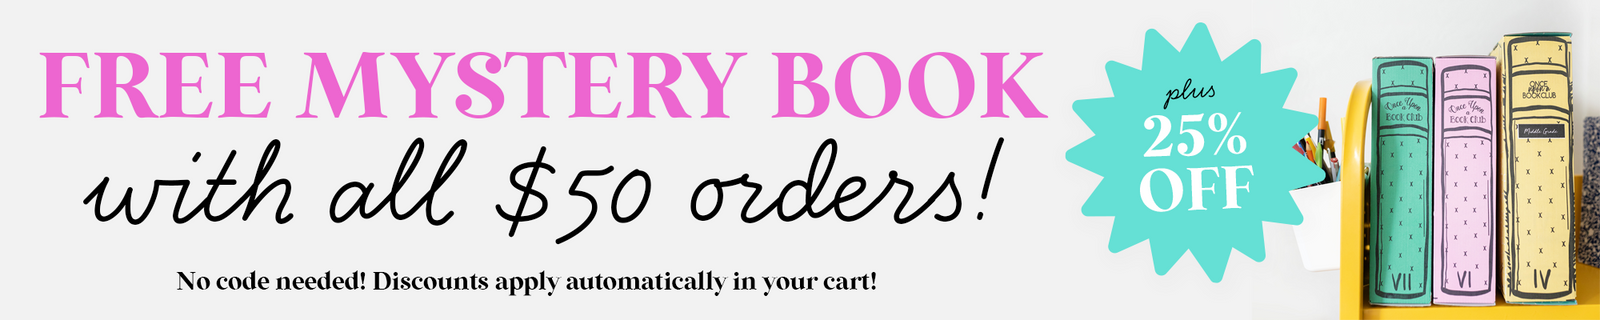 Free mystery book with all $50 orders! Plus 25% off! No code needed. Discounts apply automatically in your cart.